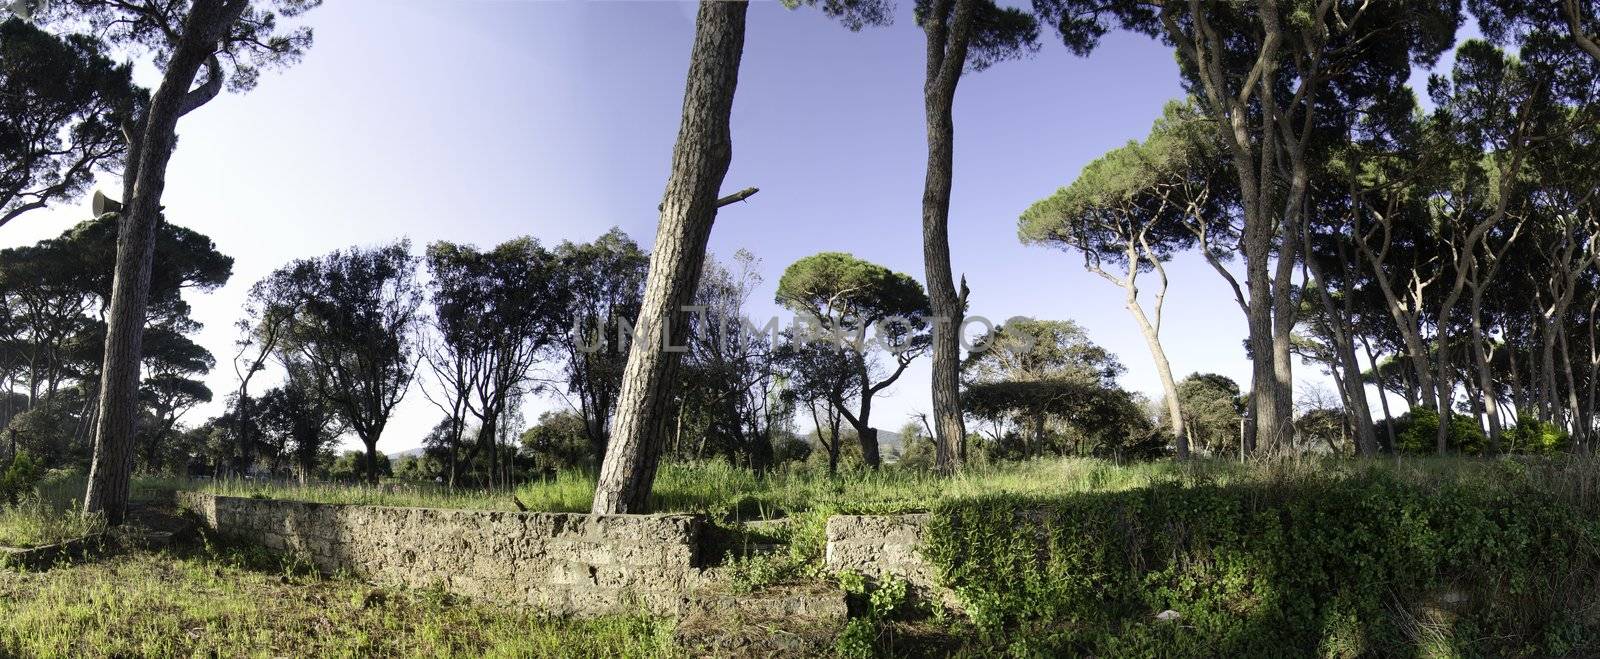 Pines in a Tuscan Pinewood near Follonica by jovannig